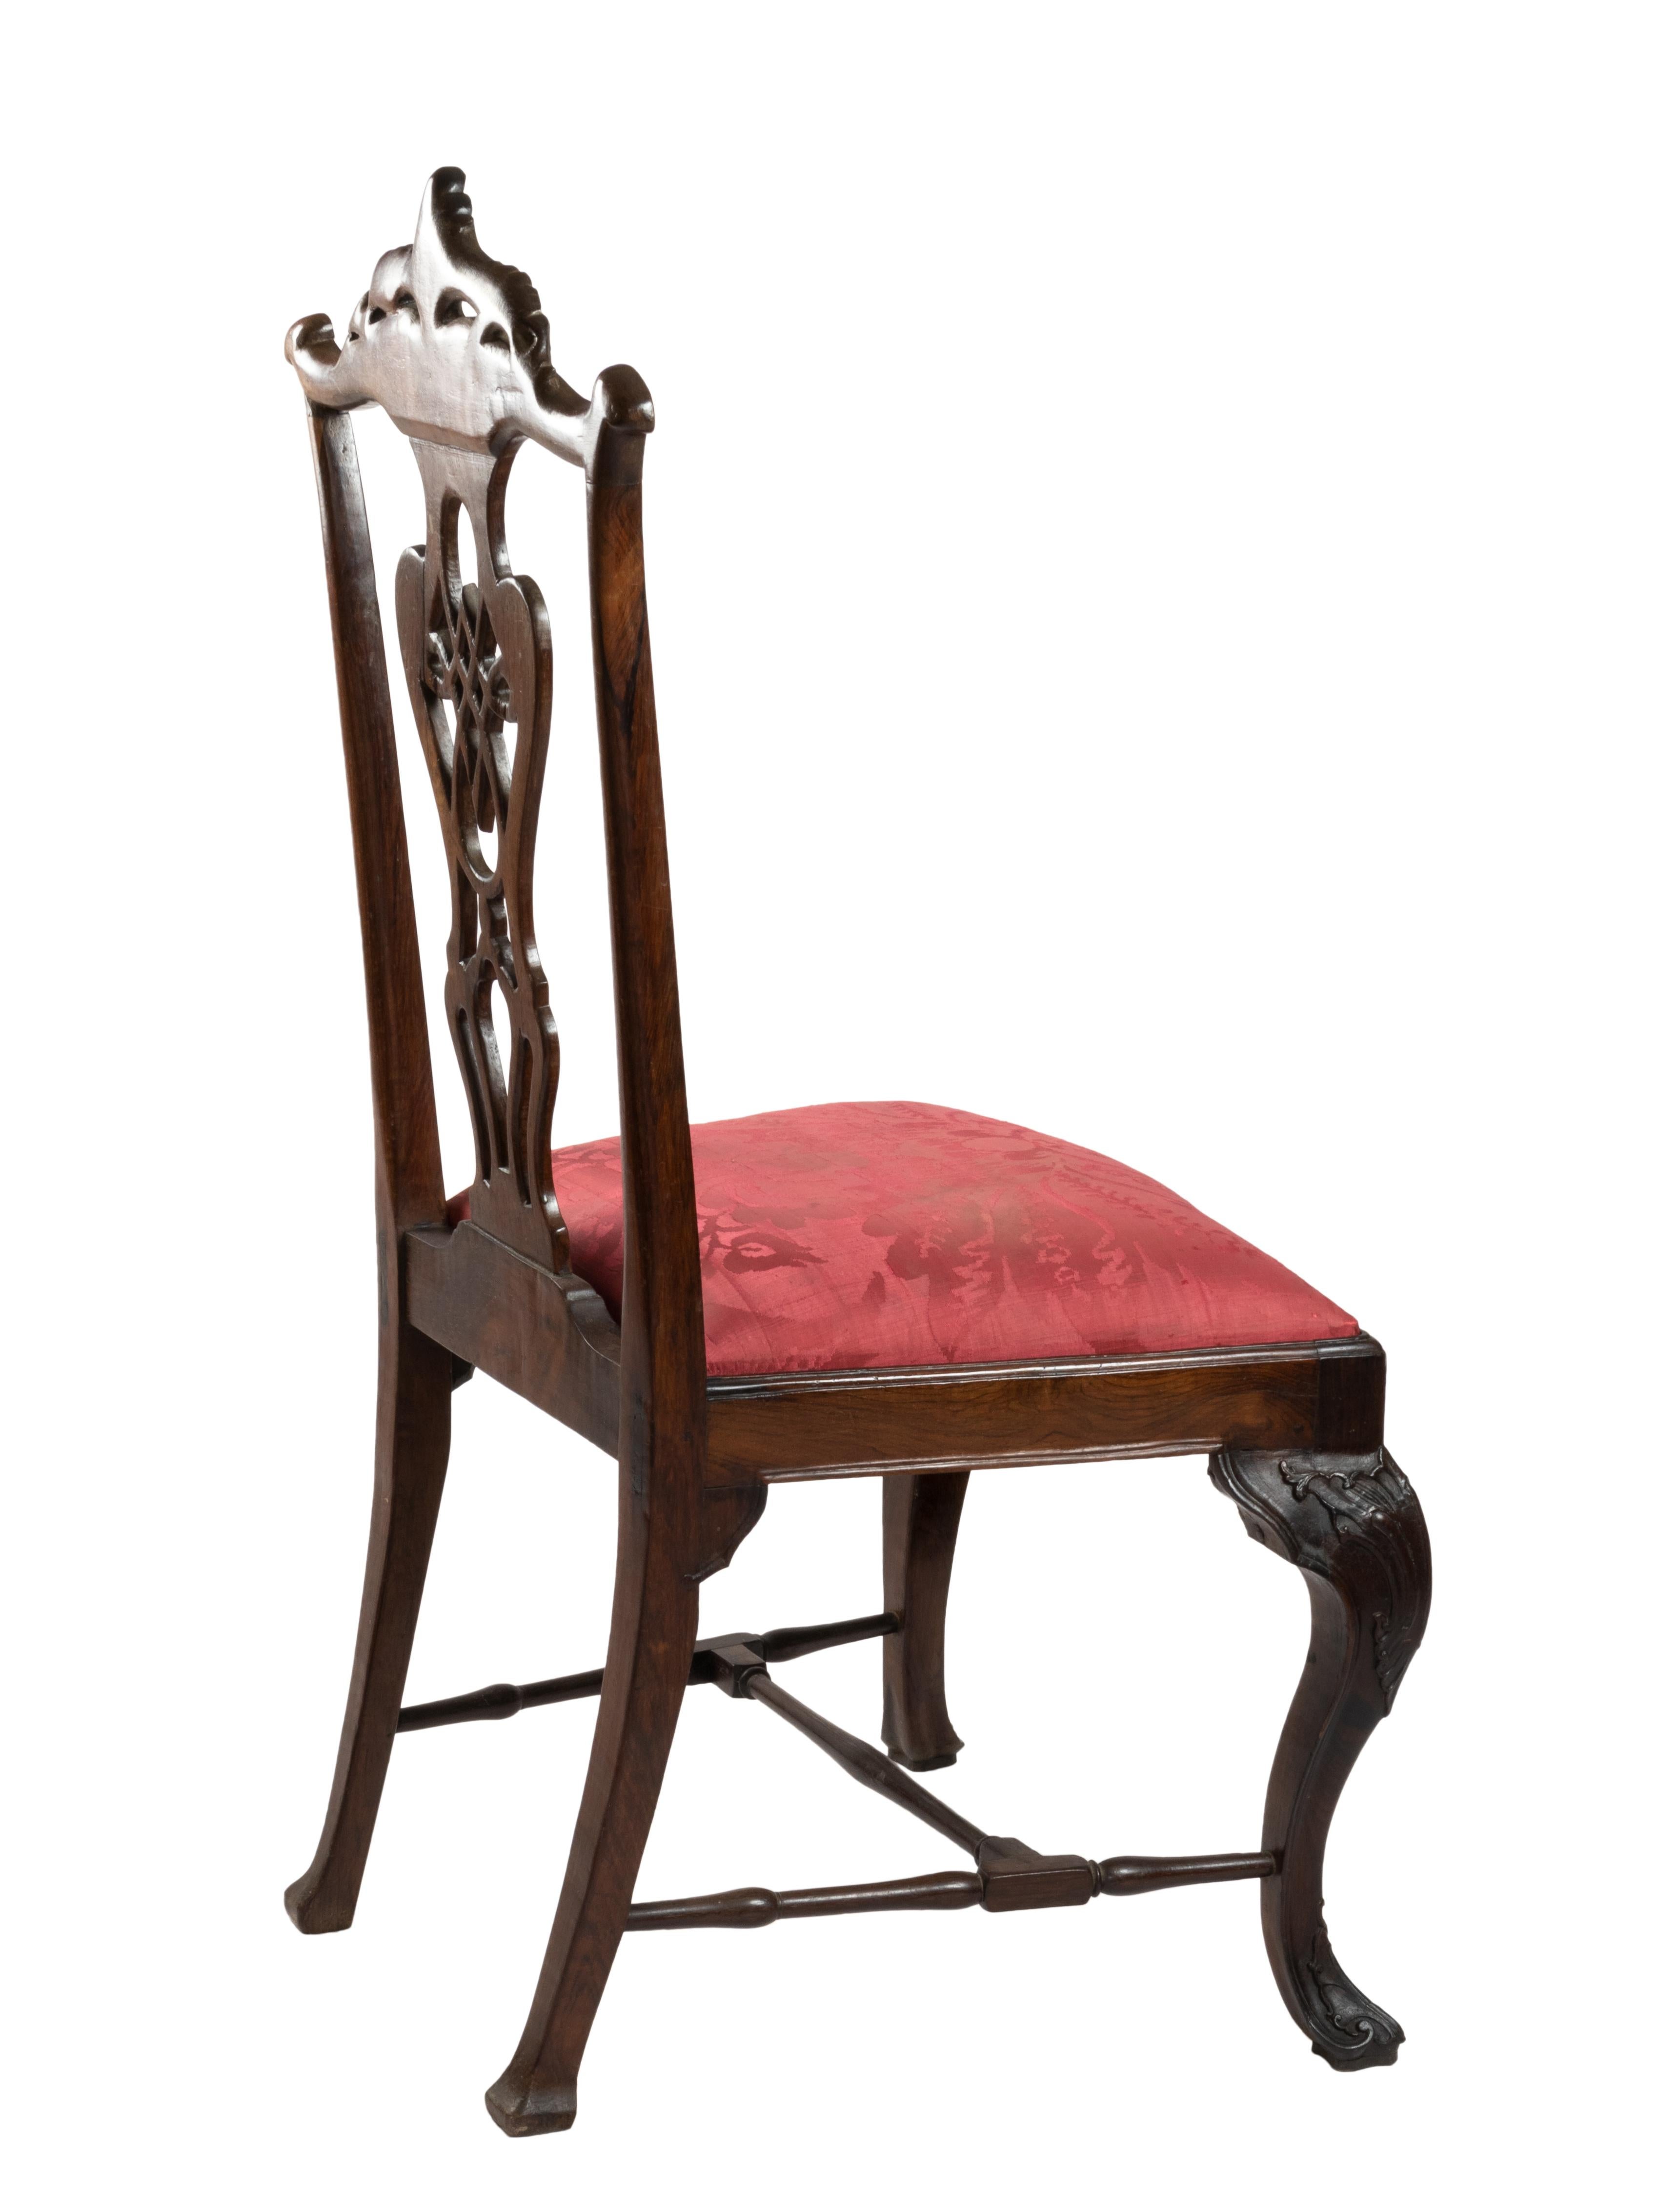 Baroque Red Damask Portuguese Chair, 18th Century For Sale 2